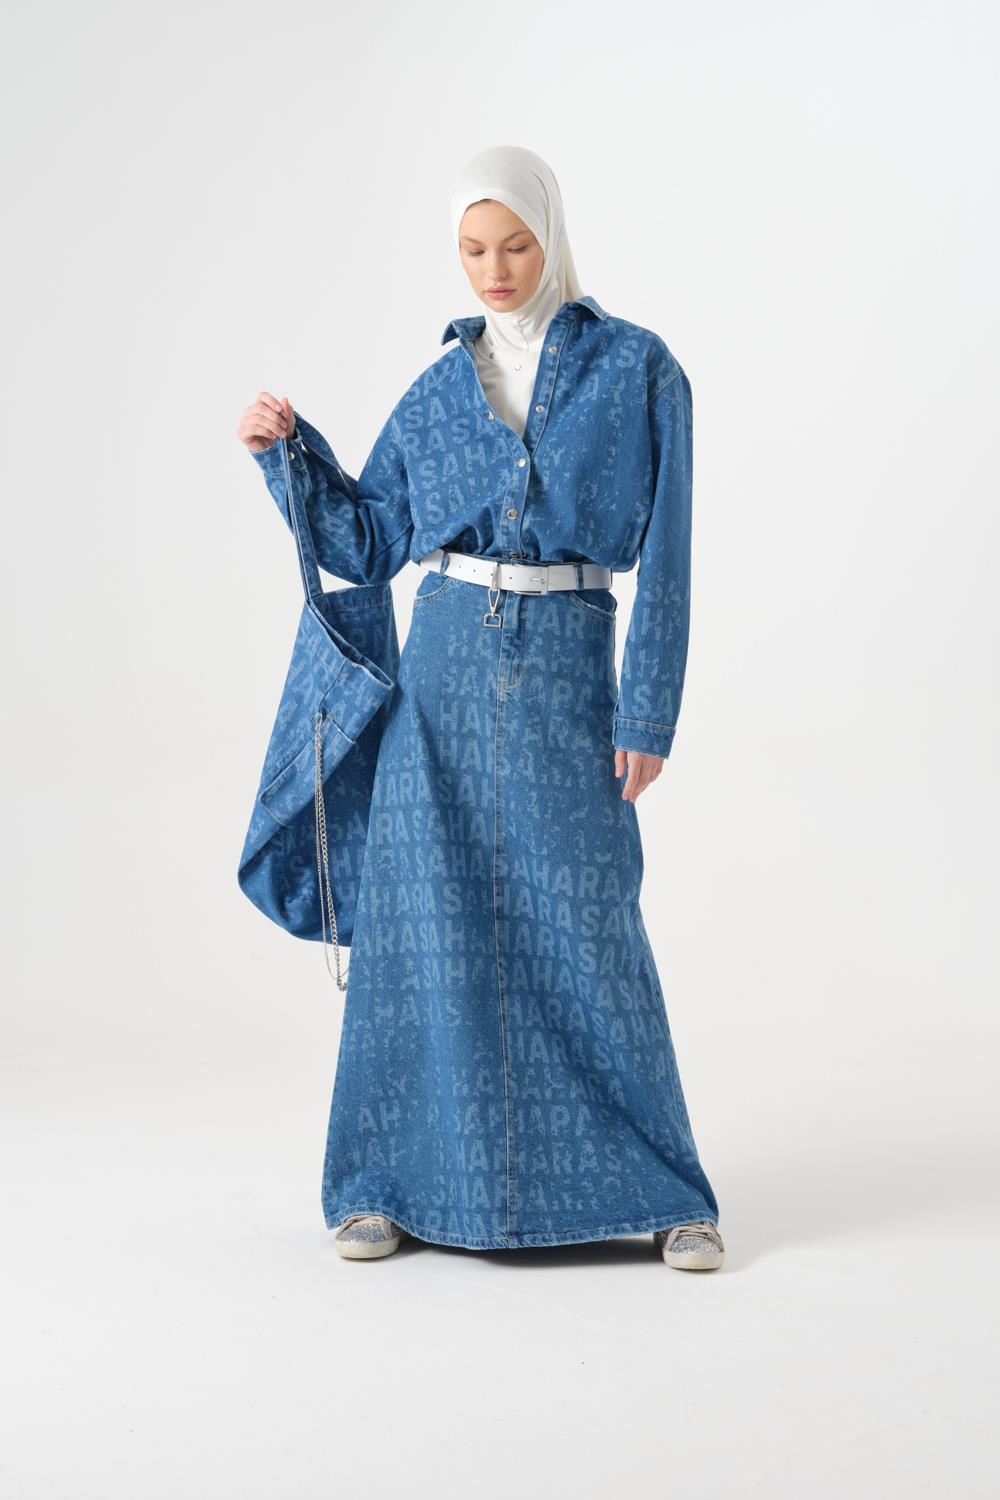 BT - Being Traditional Women's Long Denim Abaya Dress With Long Sleeves &  Side Pocket (BT-DNMA-003) (Small) : Amazon.in: Clothing & Accessories